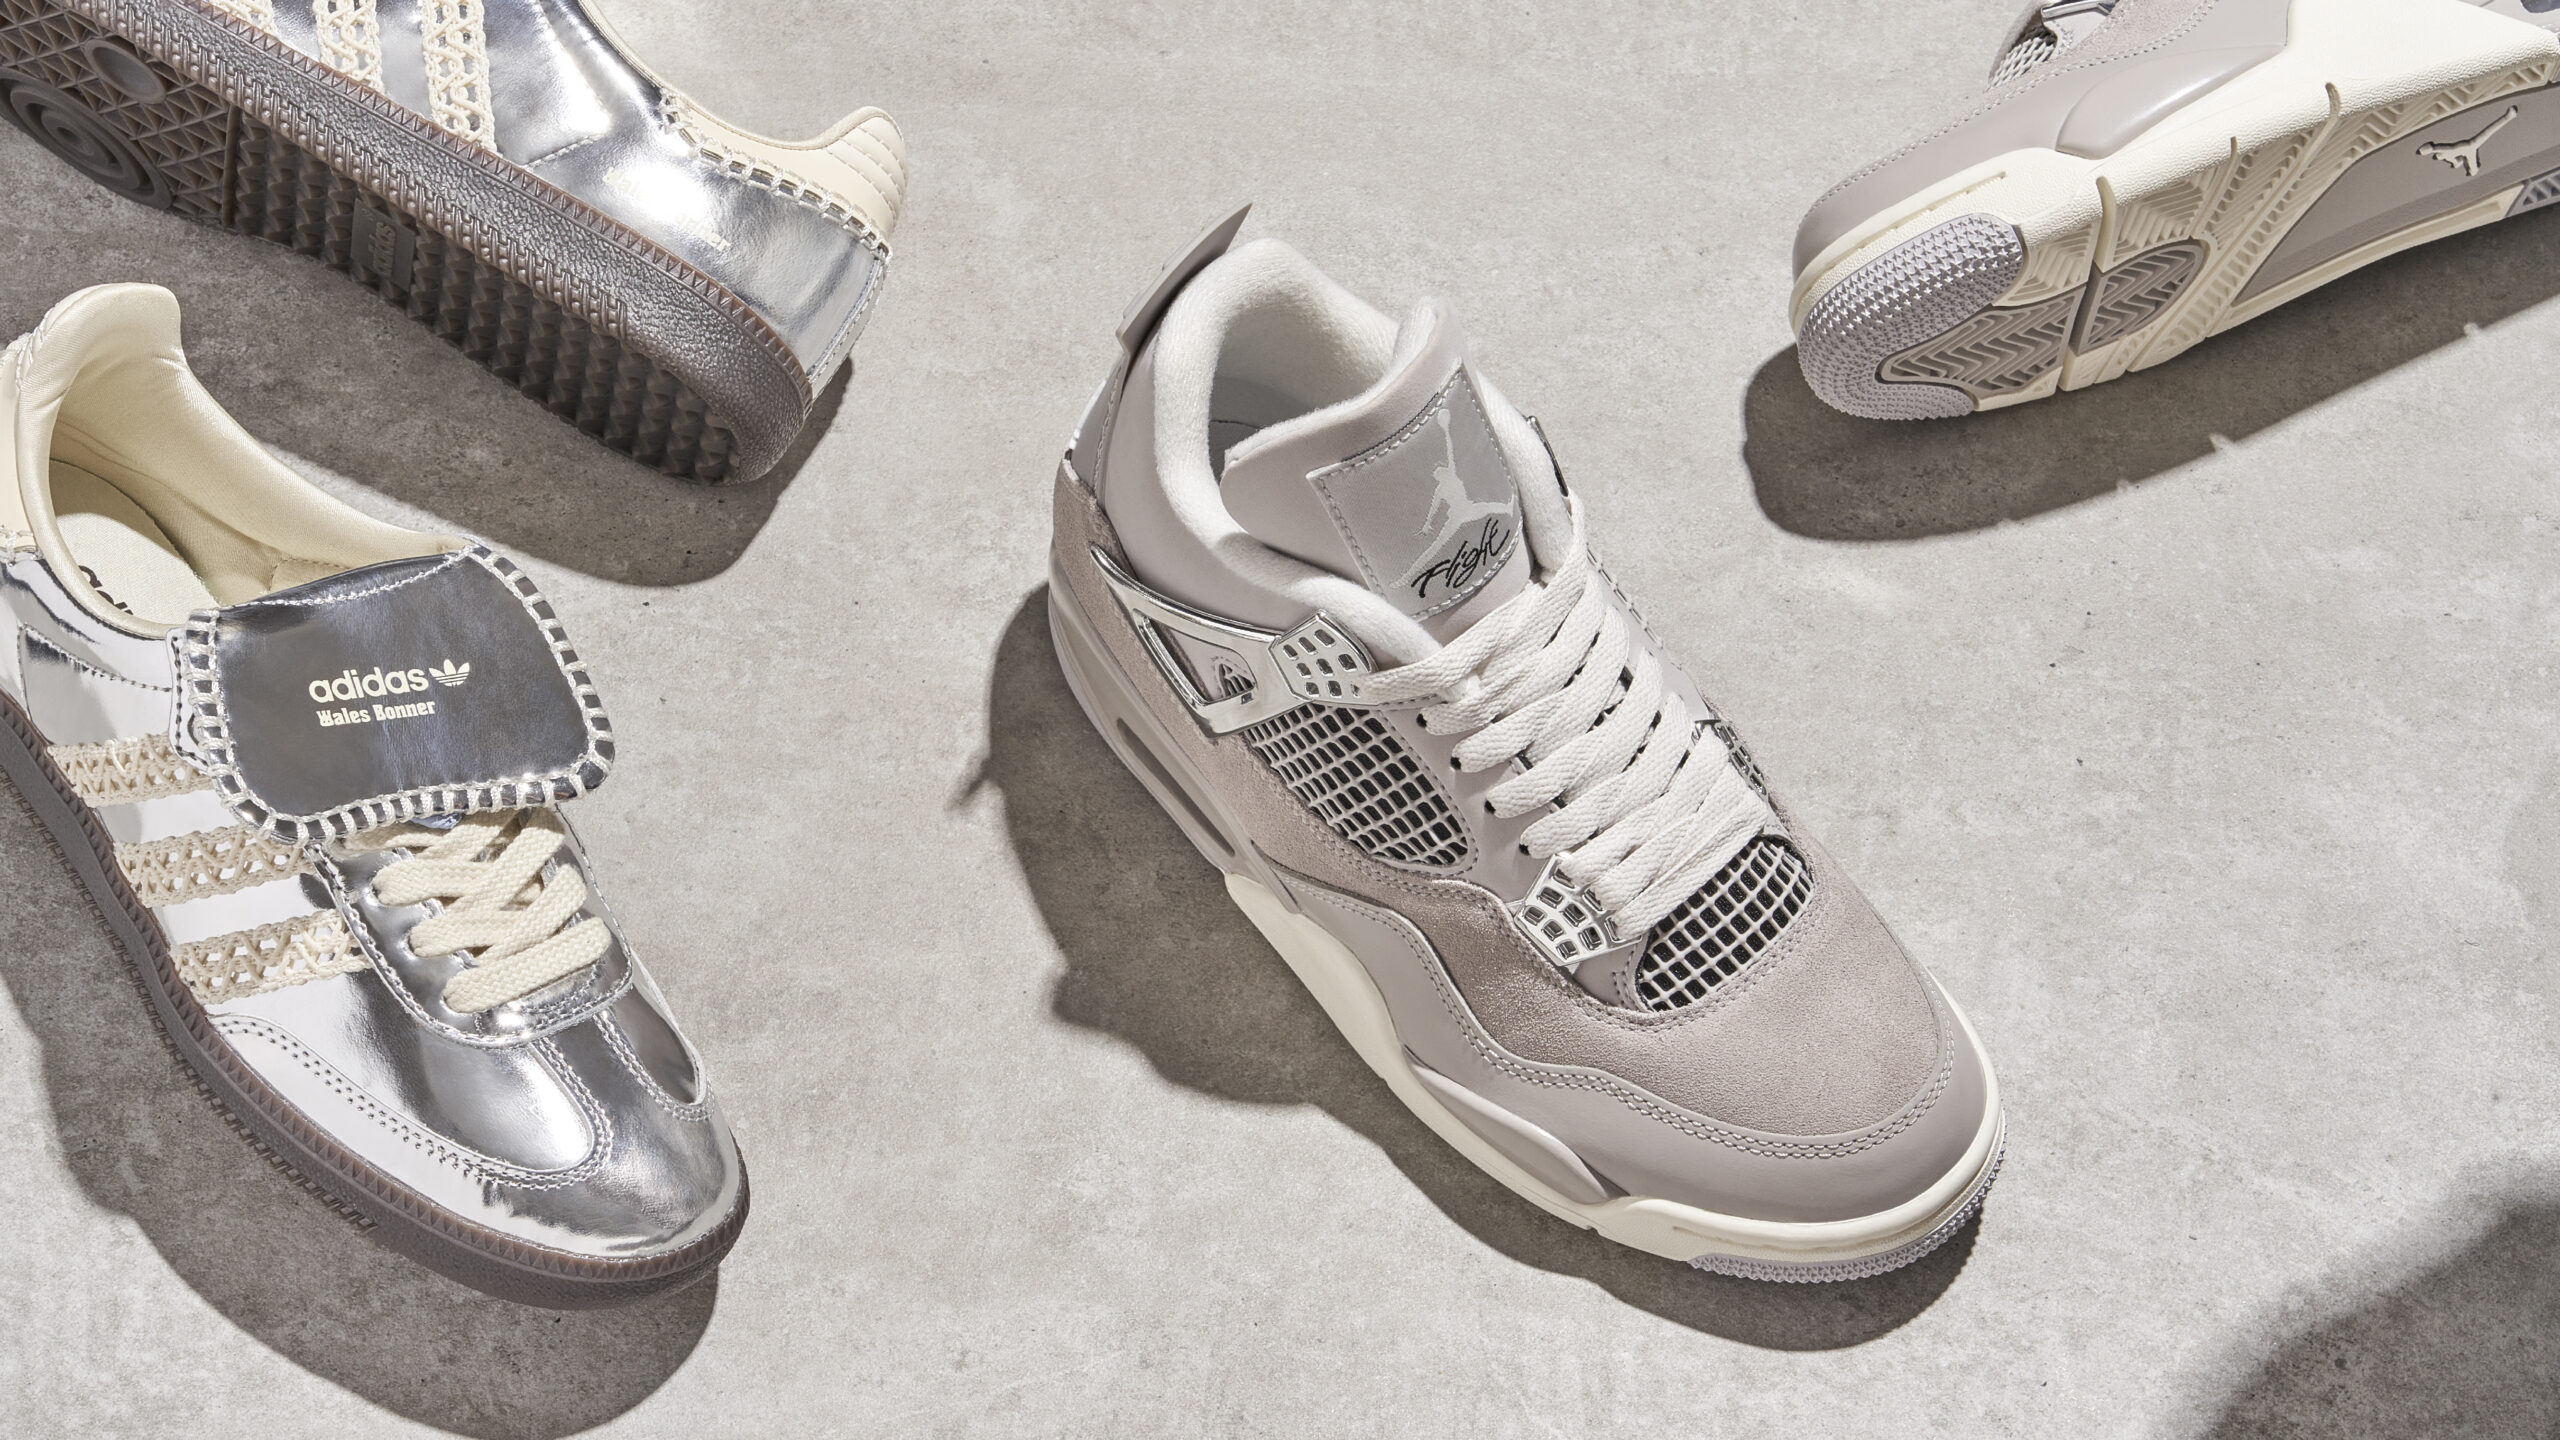 Are Metallic Sneakers Here To Stay?